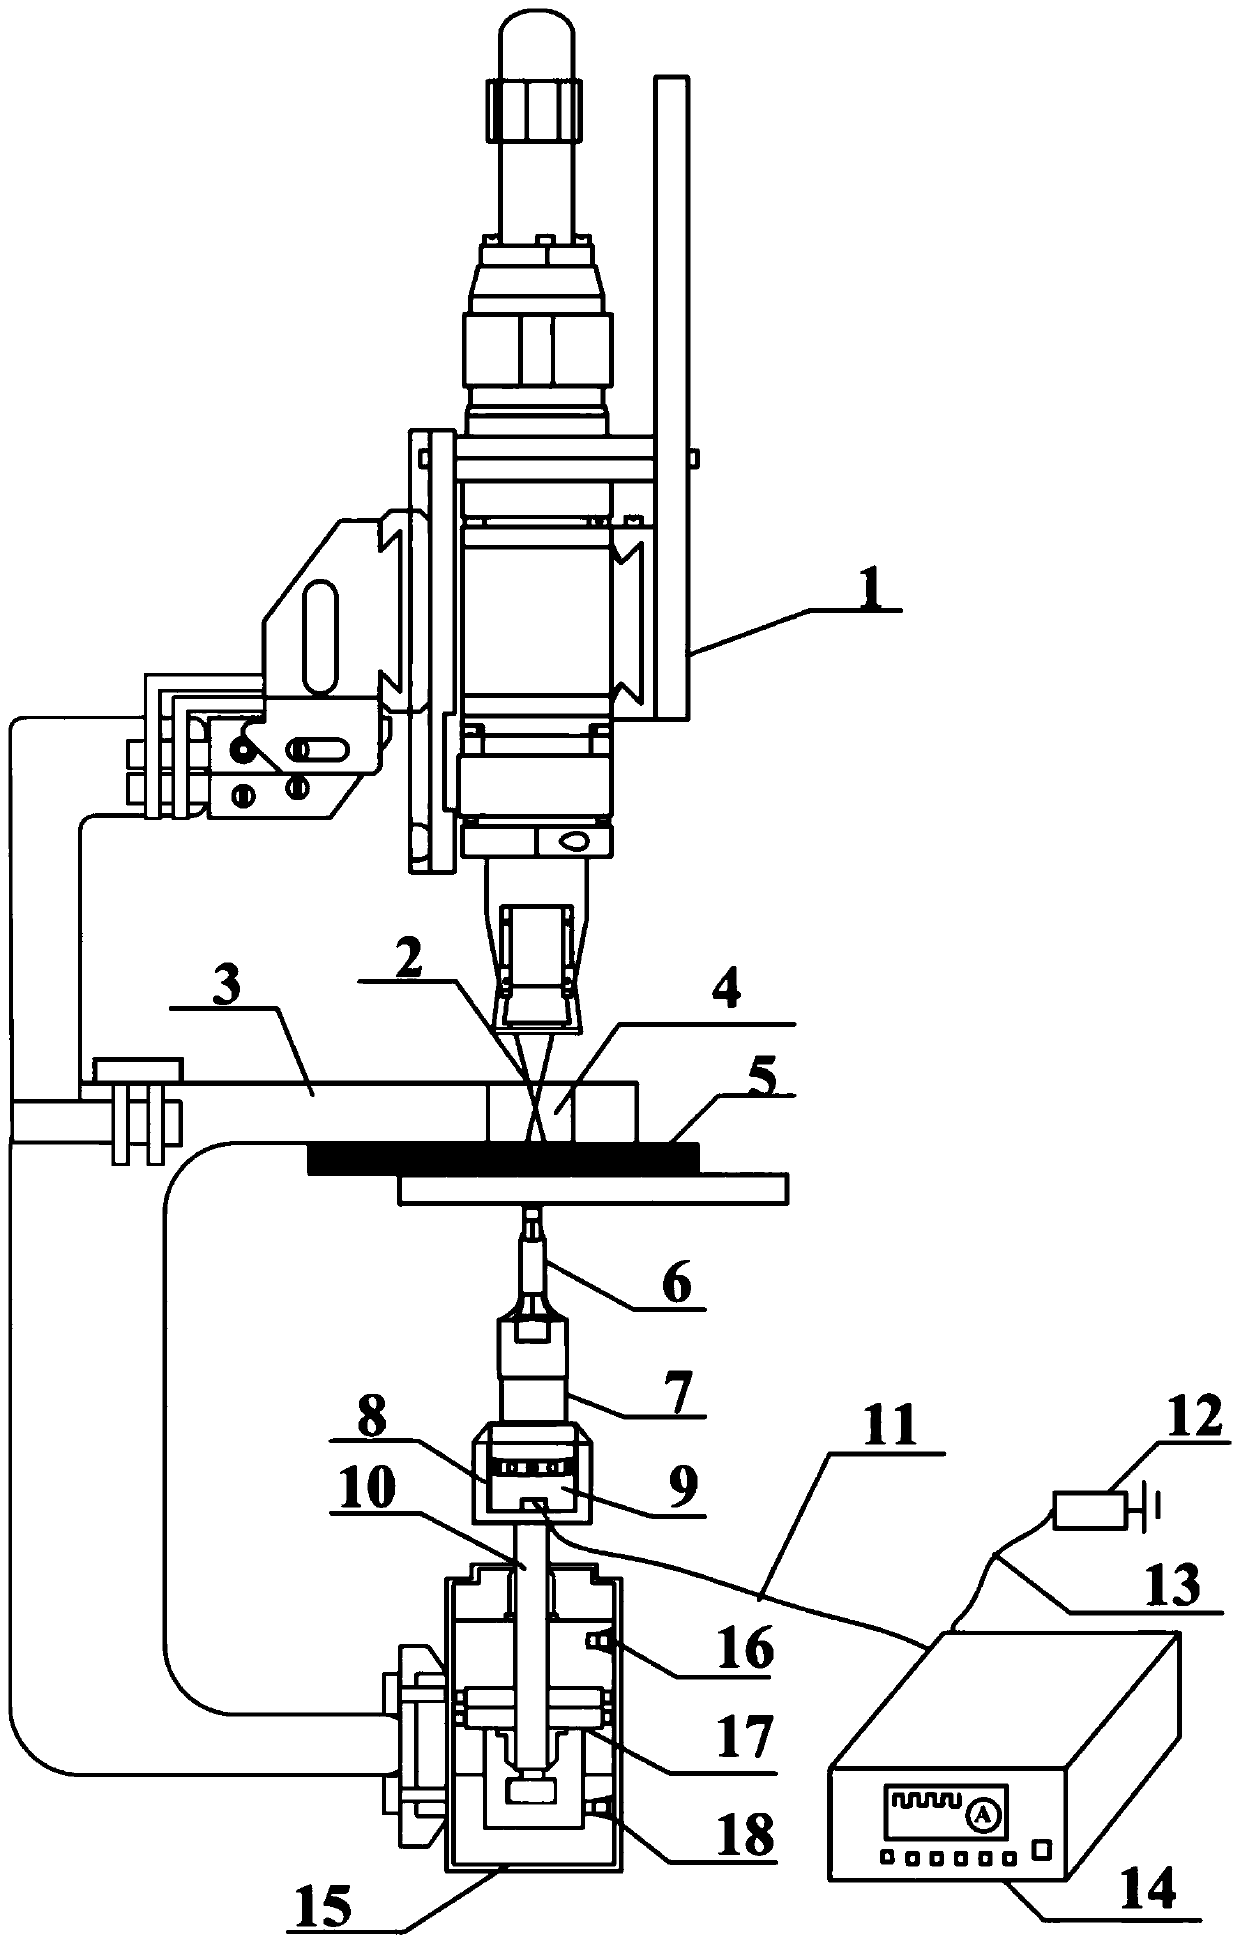 Ultrasonic-assisted laser spot welding device and method